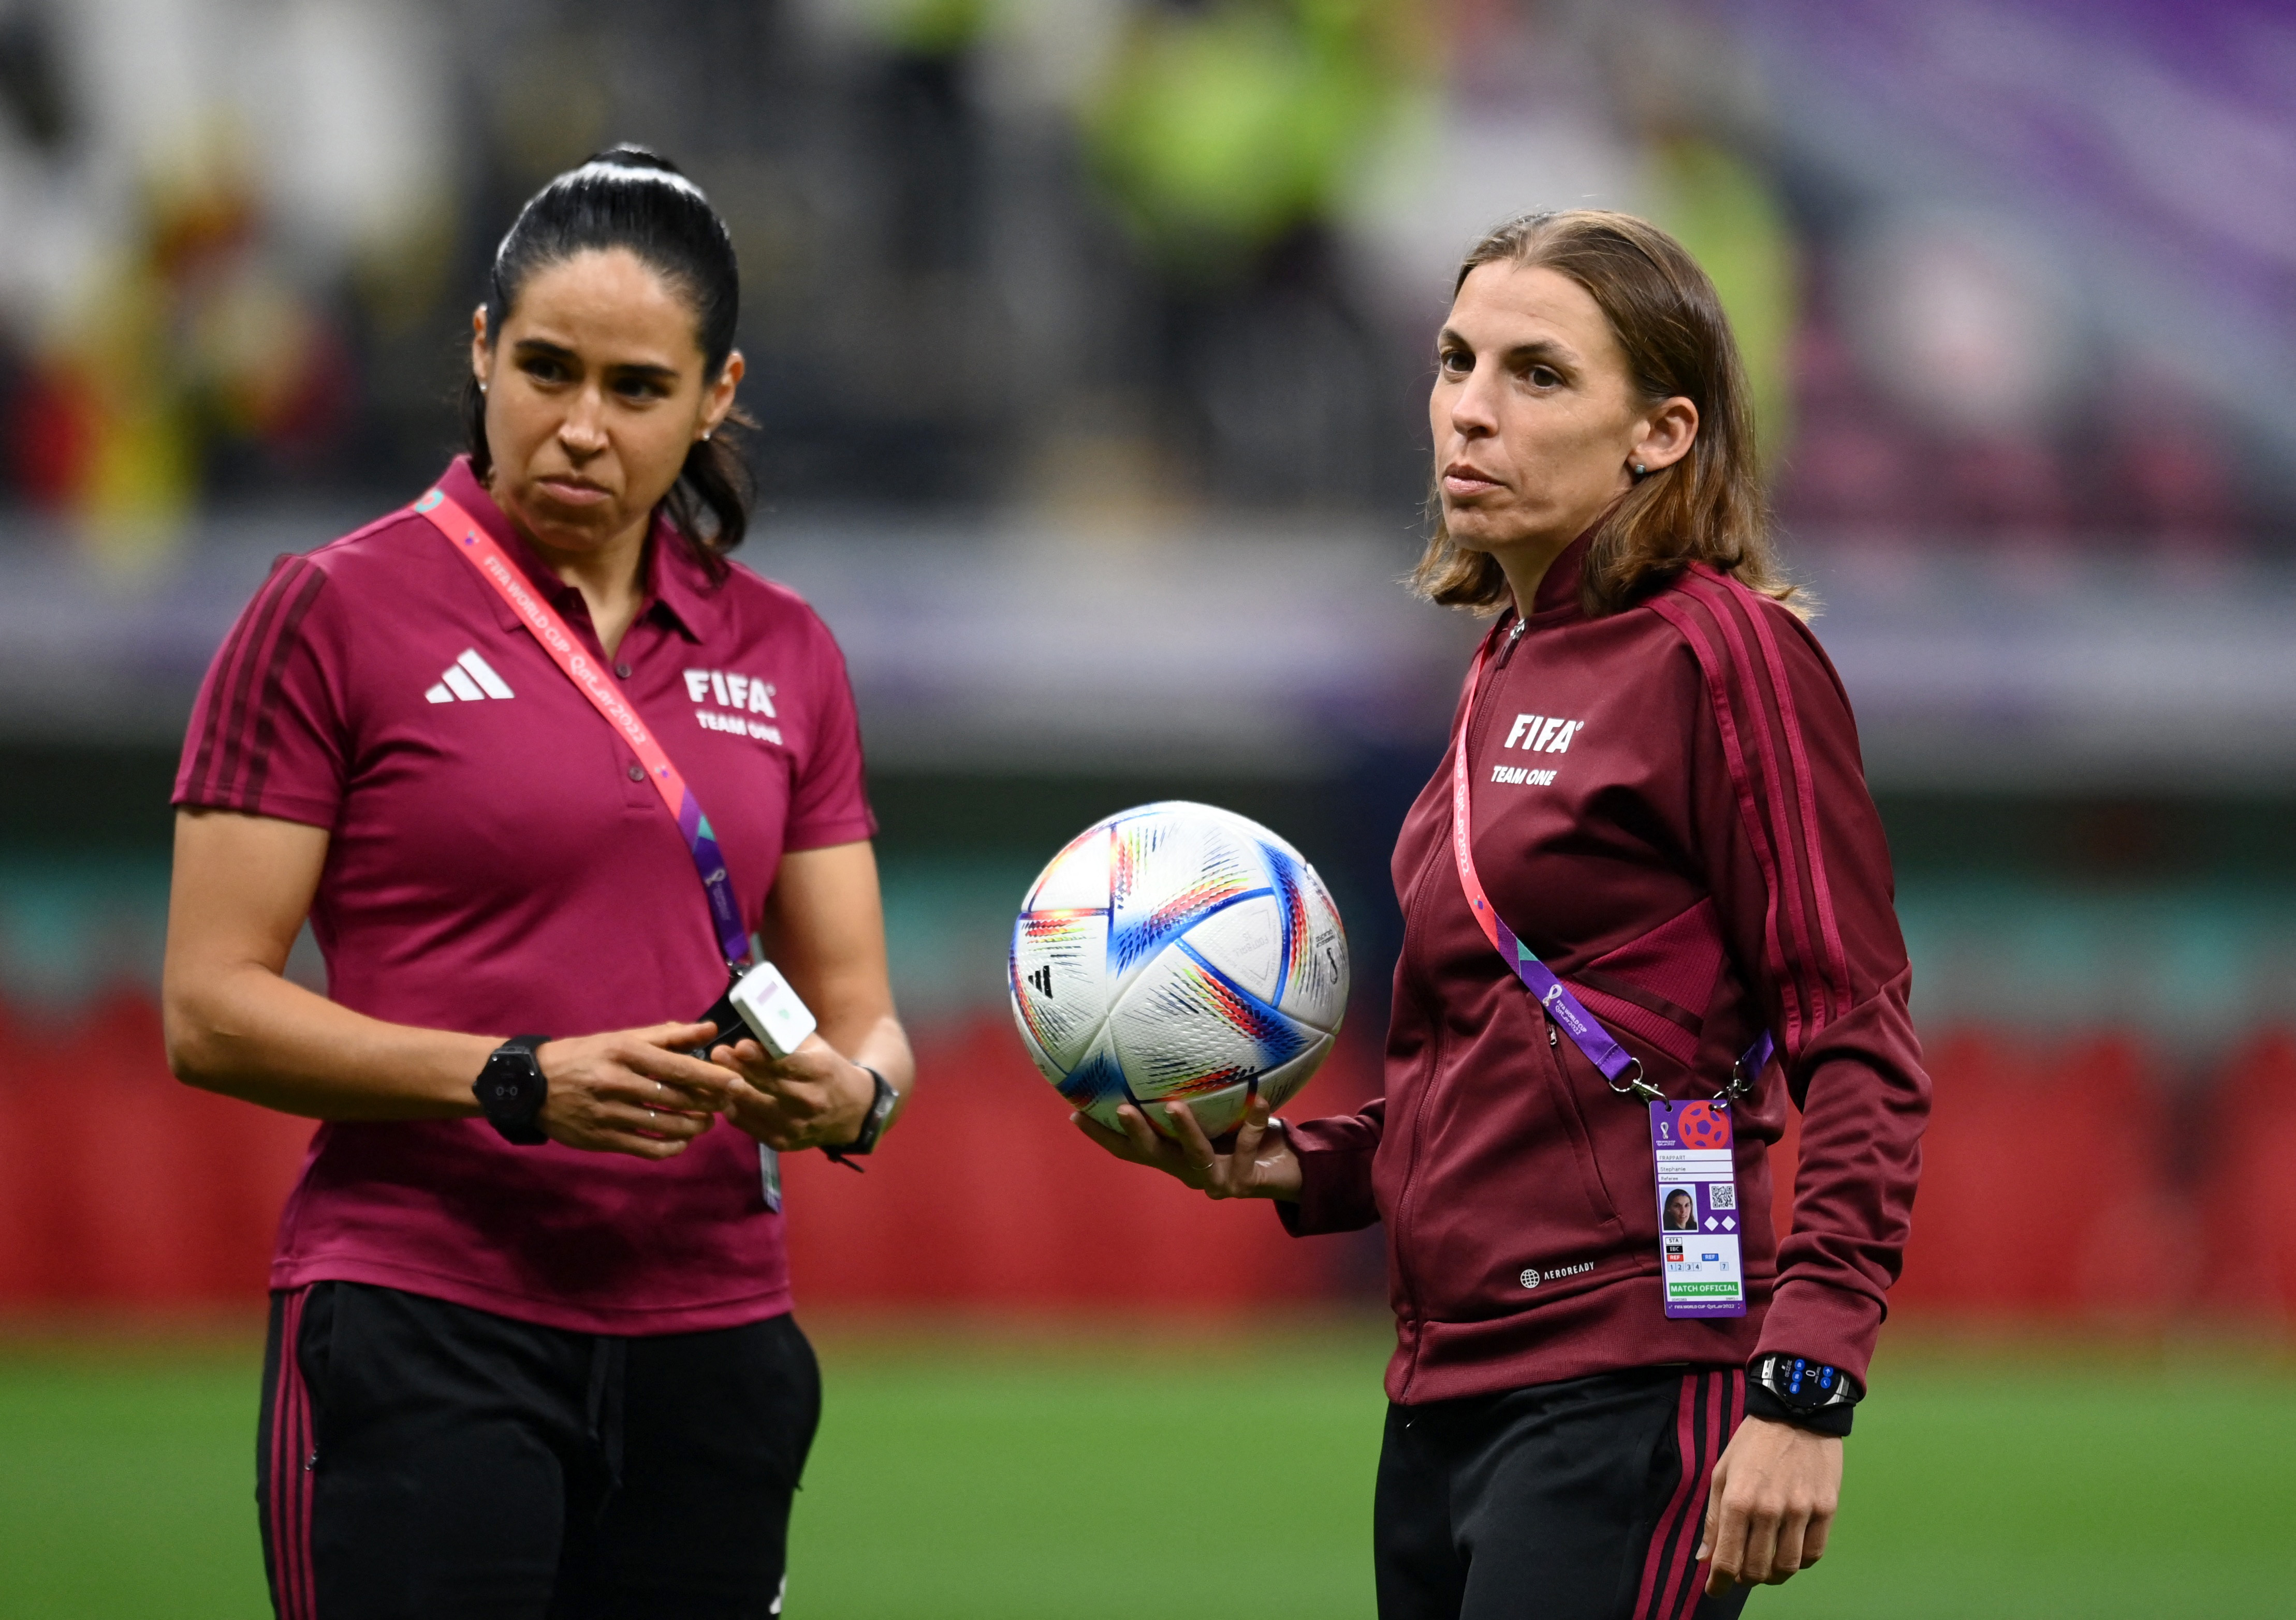 Soccer Football - FIFA World Cup Qatar 2022 - Group E - Costa Rica v Germany - Al Bayt Stadium, Al Khor, Qatar - December 1, 2022 Referee Stephanie Frappart and assistant referee Karen Diaz before the match REUTERS/Annegret Hilse